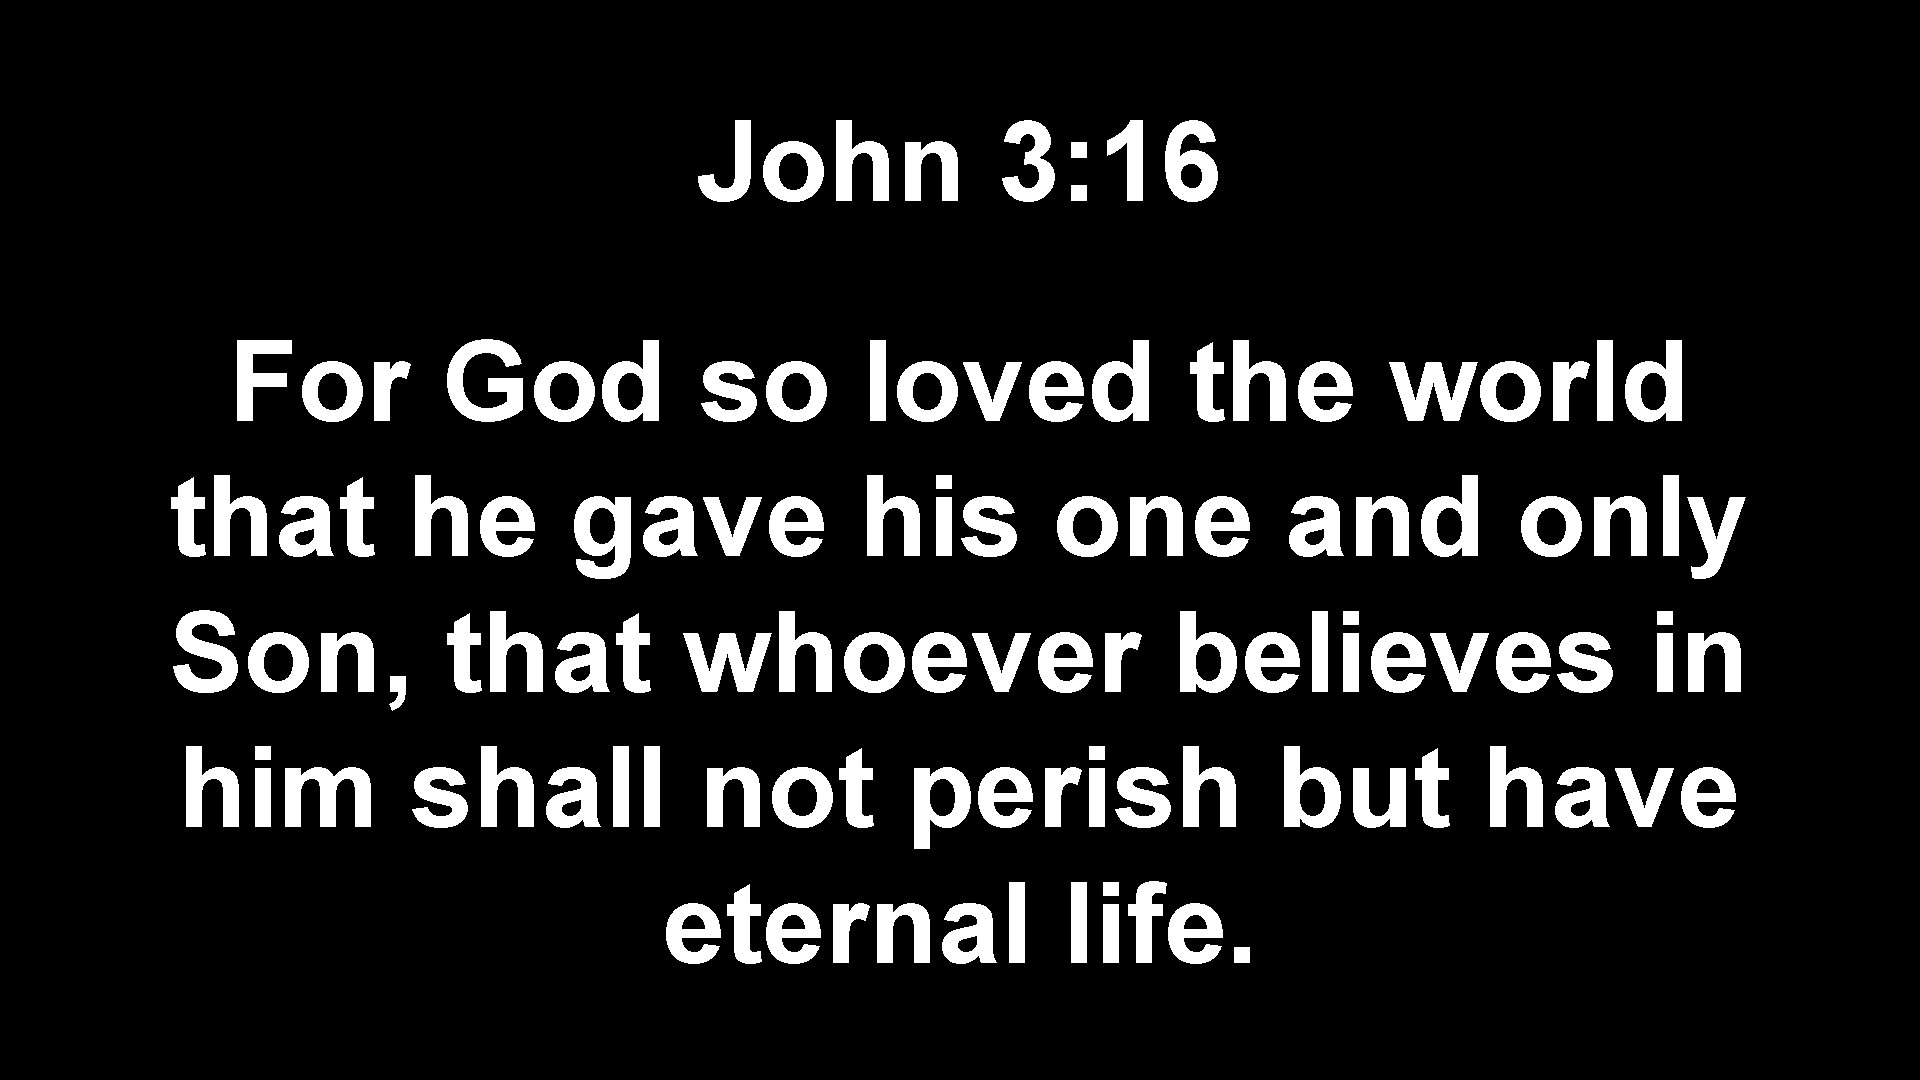 John 3: 16 For God so loved the world that he gave his one